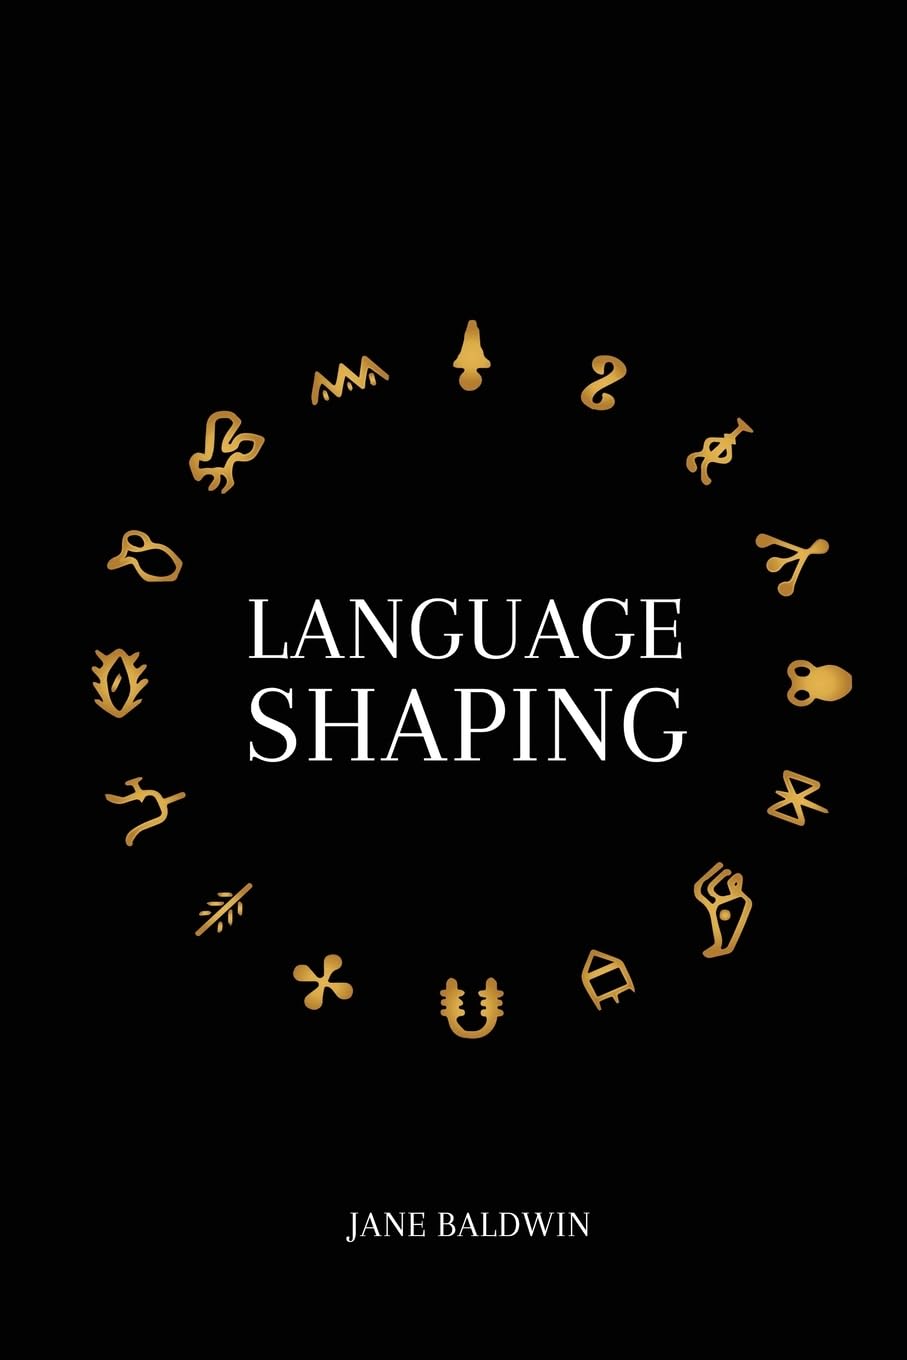 Unravel the Mysteries of "Language Shaping" by Jane Baldwin: A Sci-Fi Thriller Unveiling Ancient Cultures, Mirror Neurons, and the Essence of Humanity